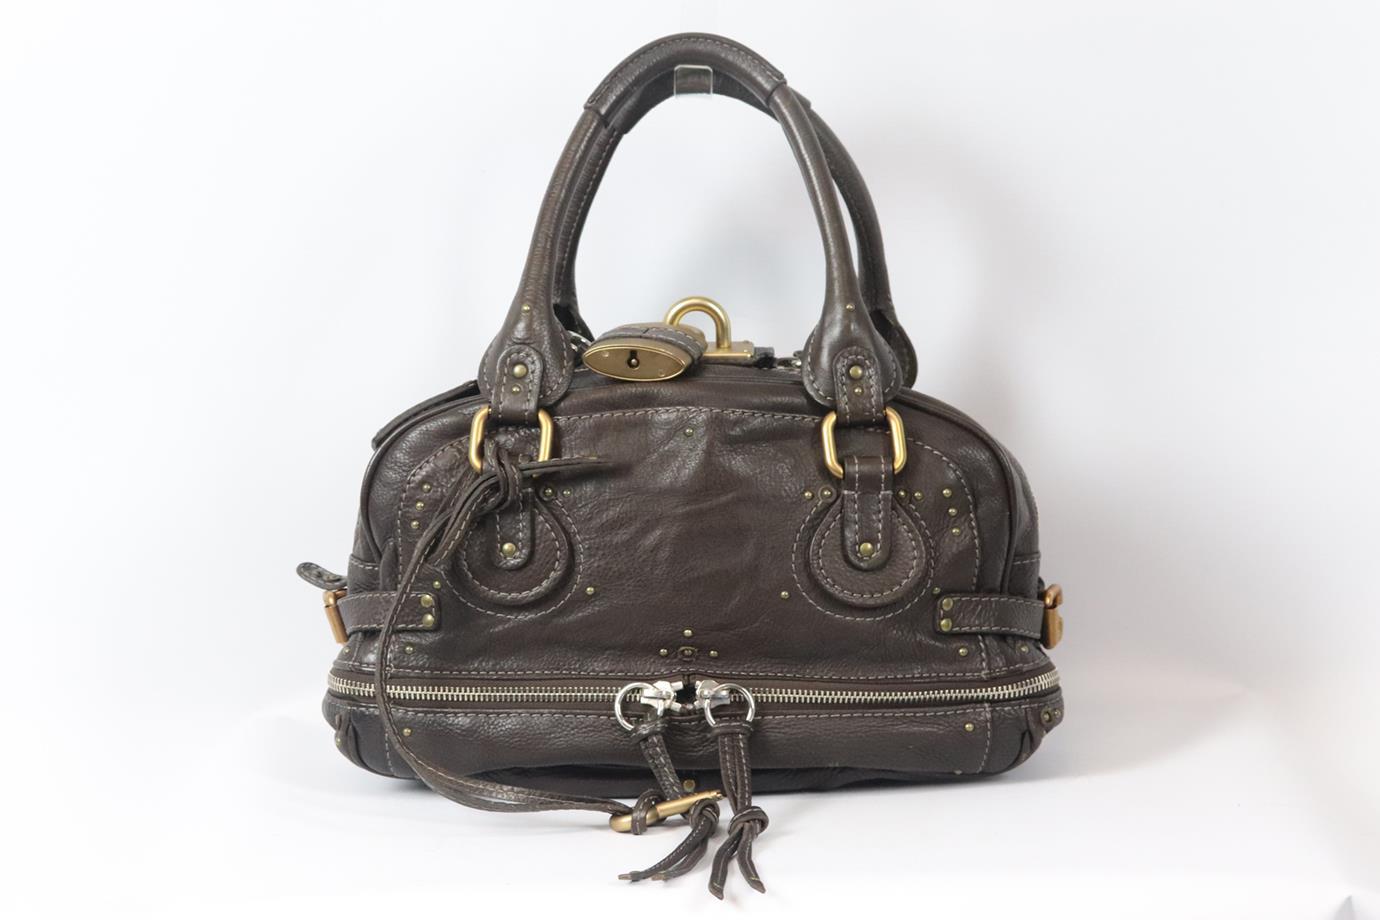 Chloé Paddington large leather shoulder bag. Brown. Zip fastening at top. Does not come with dusbtag or box. Height: 8 in. Width: 14 in. Depth: 5.5 in. Strap Drop: 7 in. Good condition - Some scuff marks to corners, exterior leather and shoulder